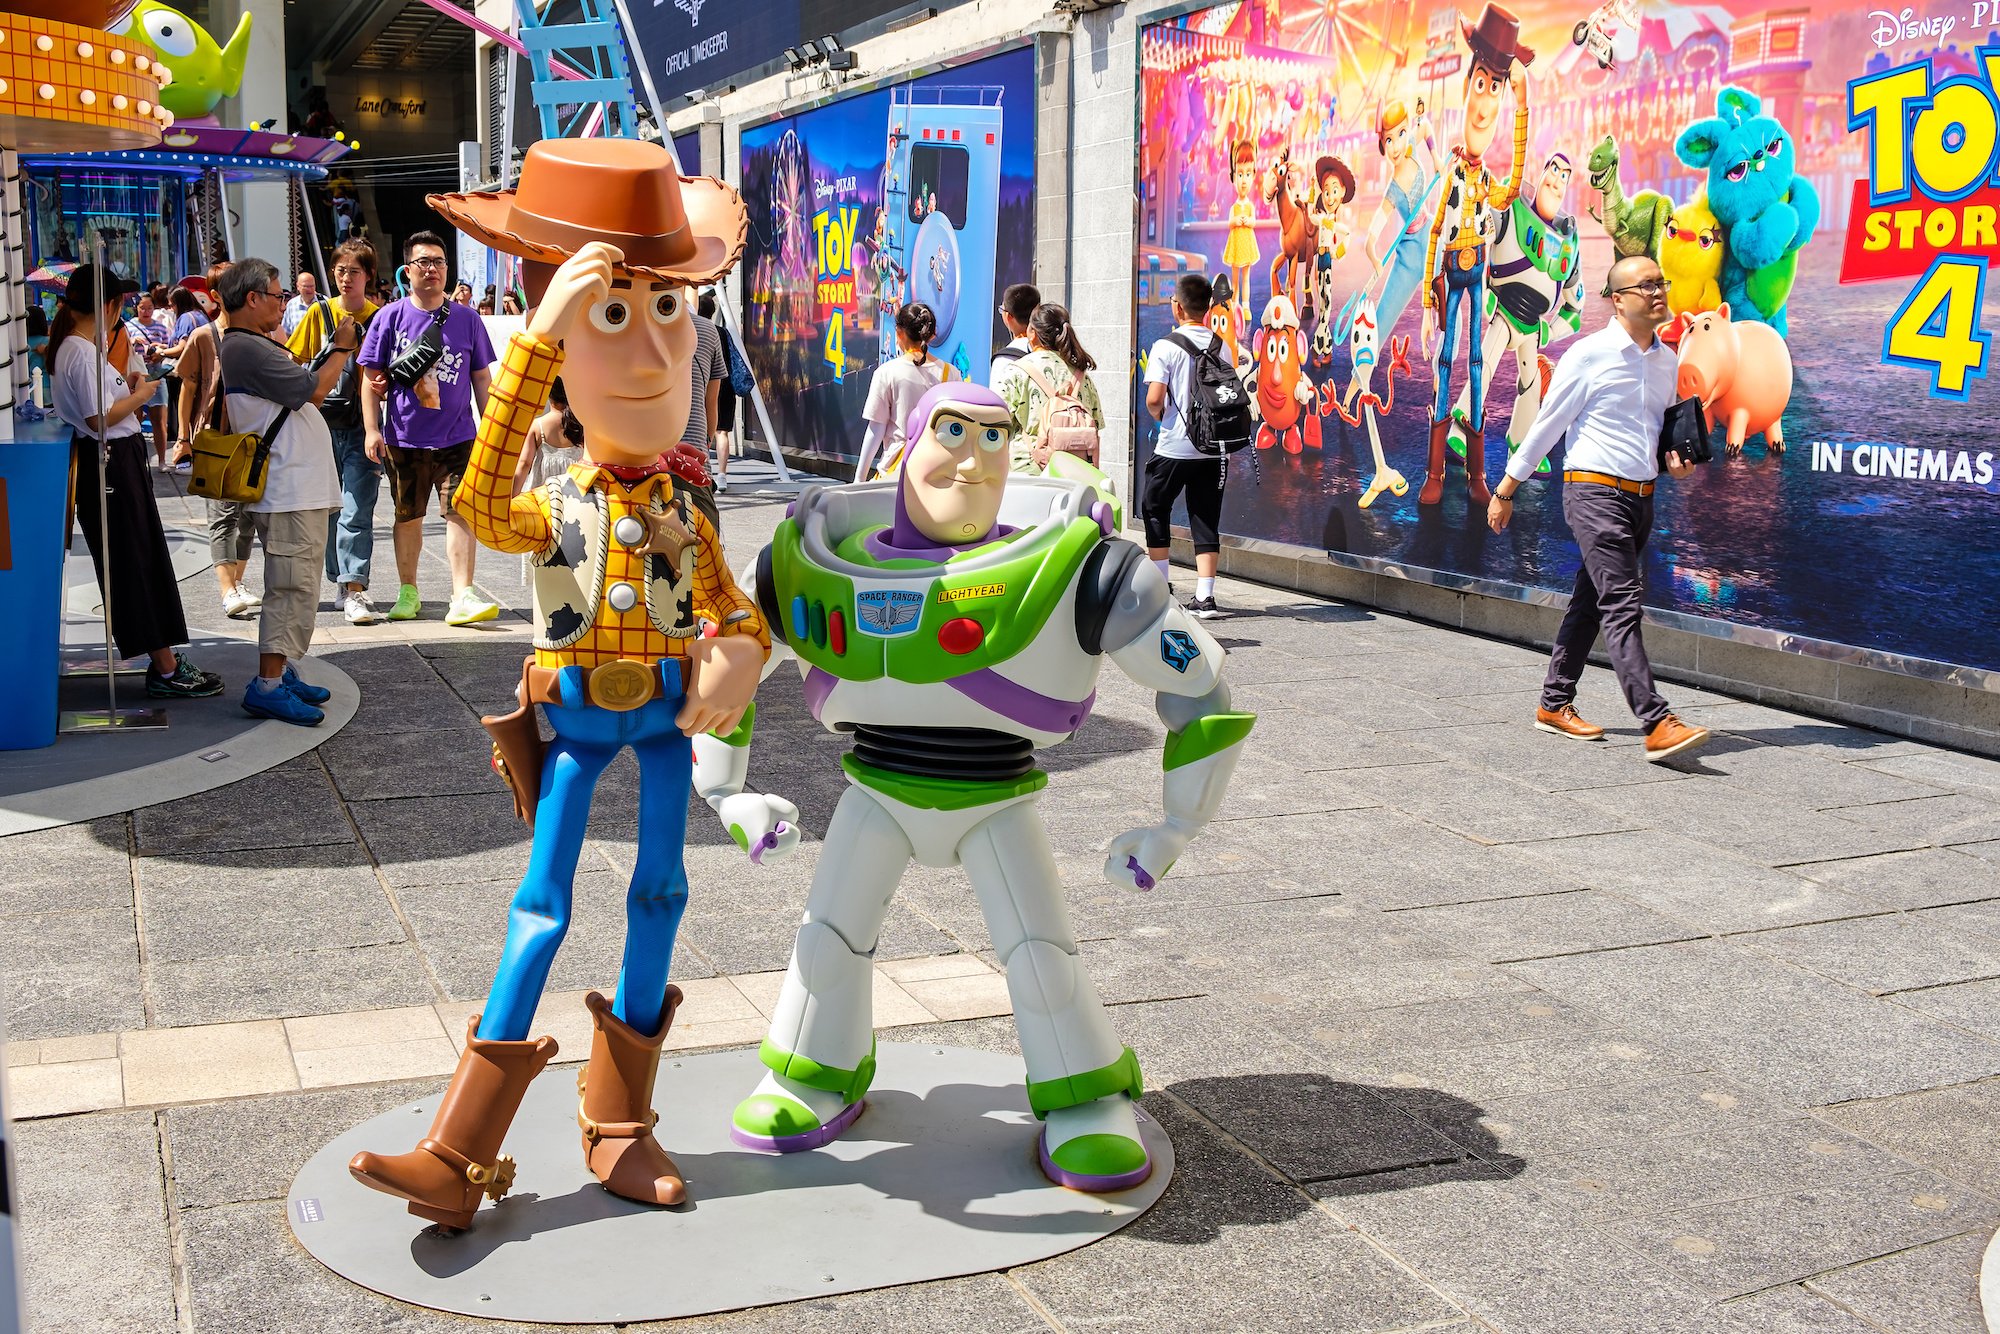 Replicas of Sheriff Woody and Buzz Lightyear